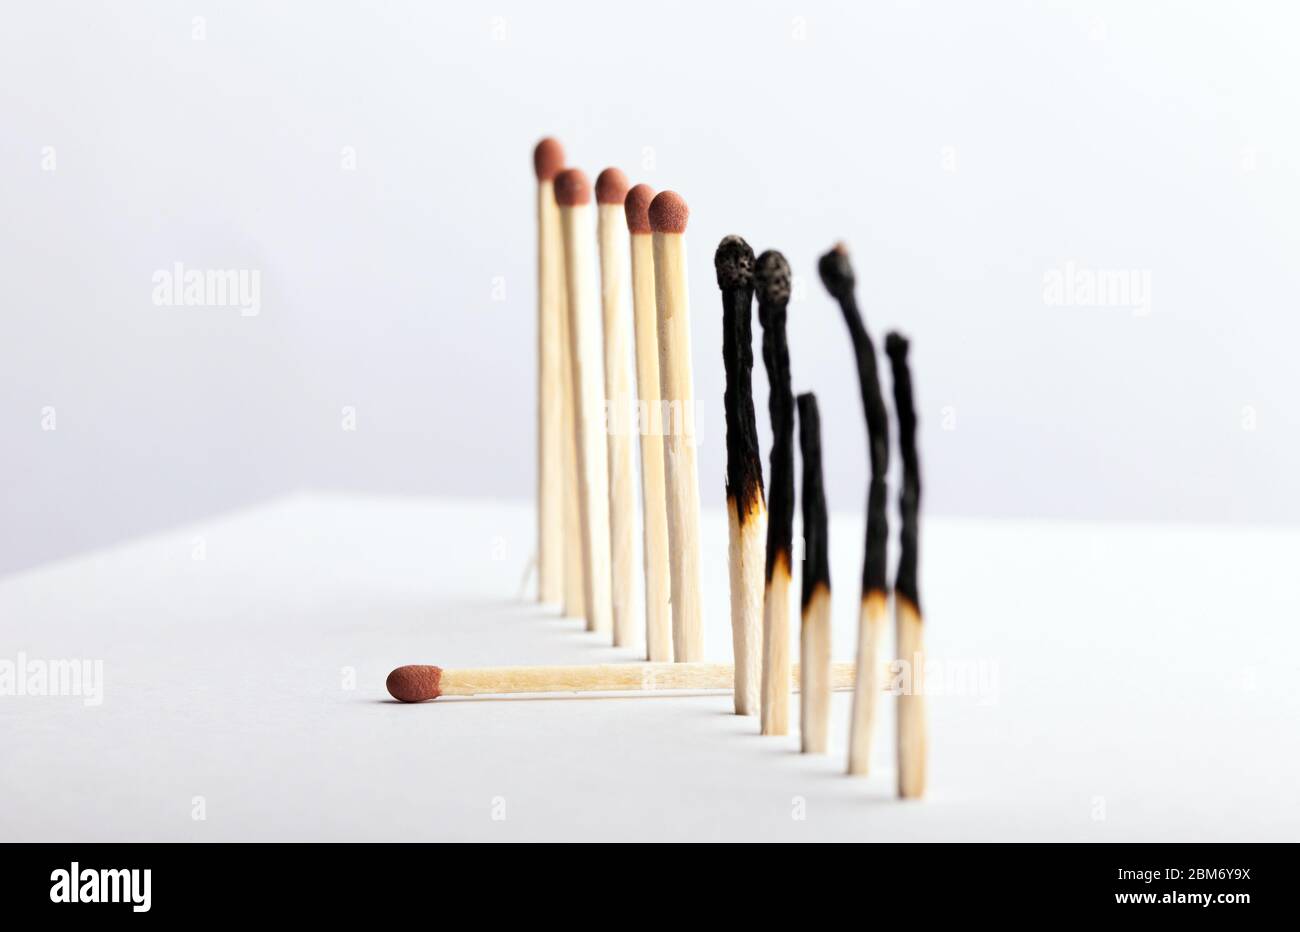 Close Up One New Wooden Match Stick Standing Among Burnt Matches Stick  Stock Photo - Download Image Now - iStock